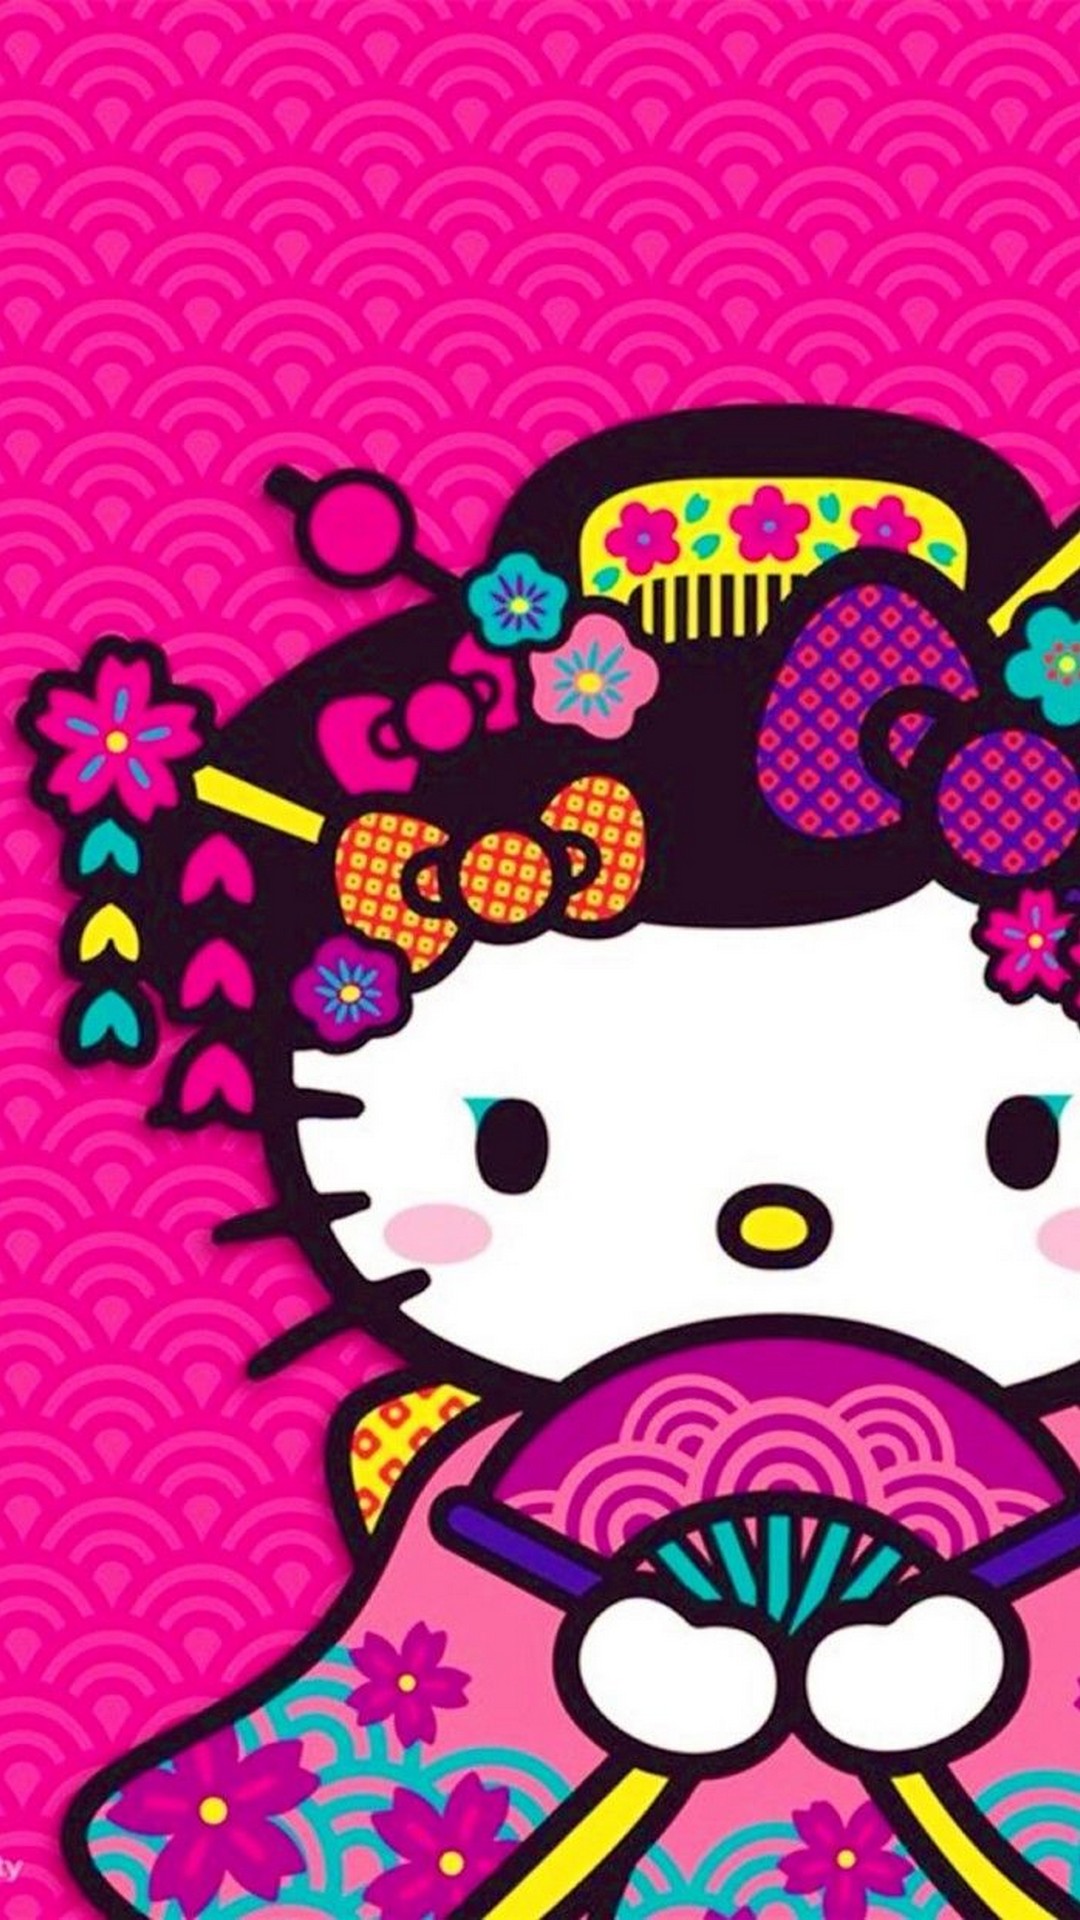 Hello Kitty Android Wallpaper with image resolution 1080x1920 pixel. You can make this wallpaper for your Android backgrounds, Tablet, Smartphones Screensavers and Mobile Phone Lock Screen